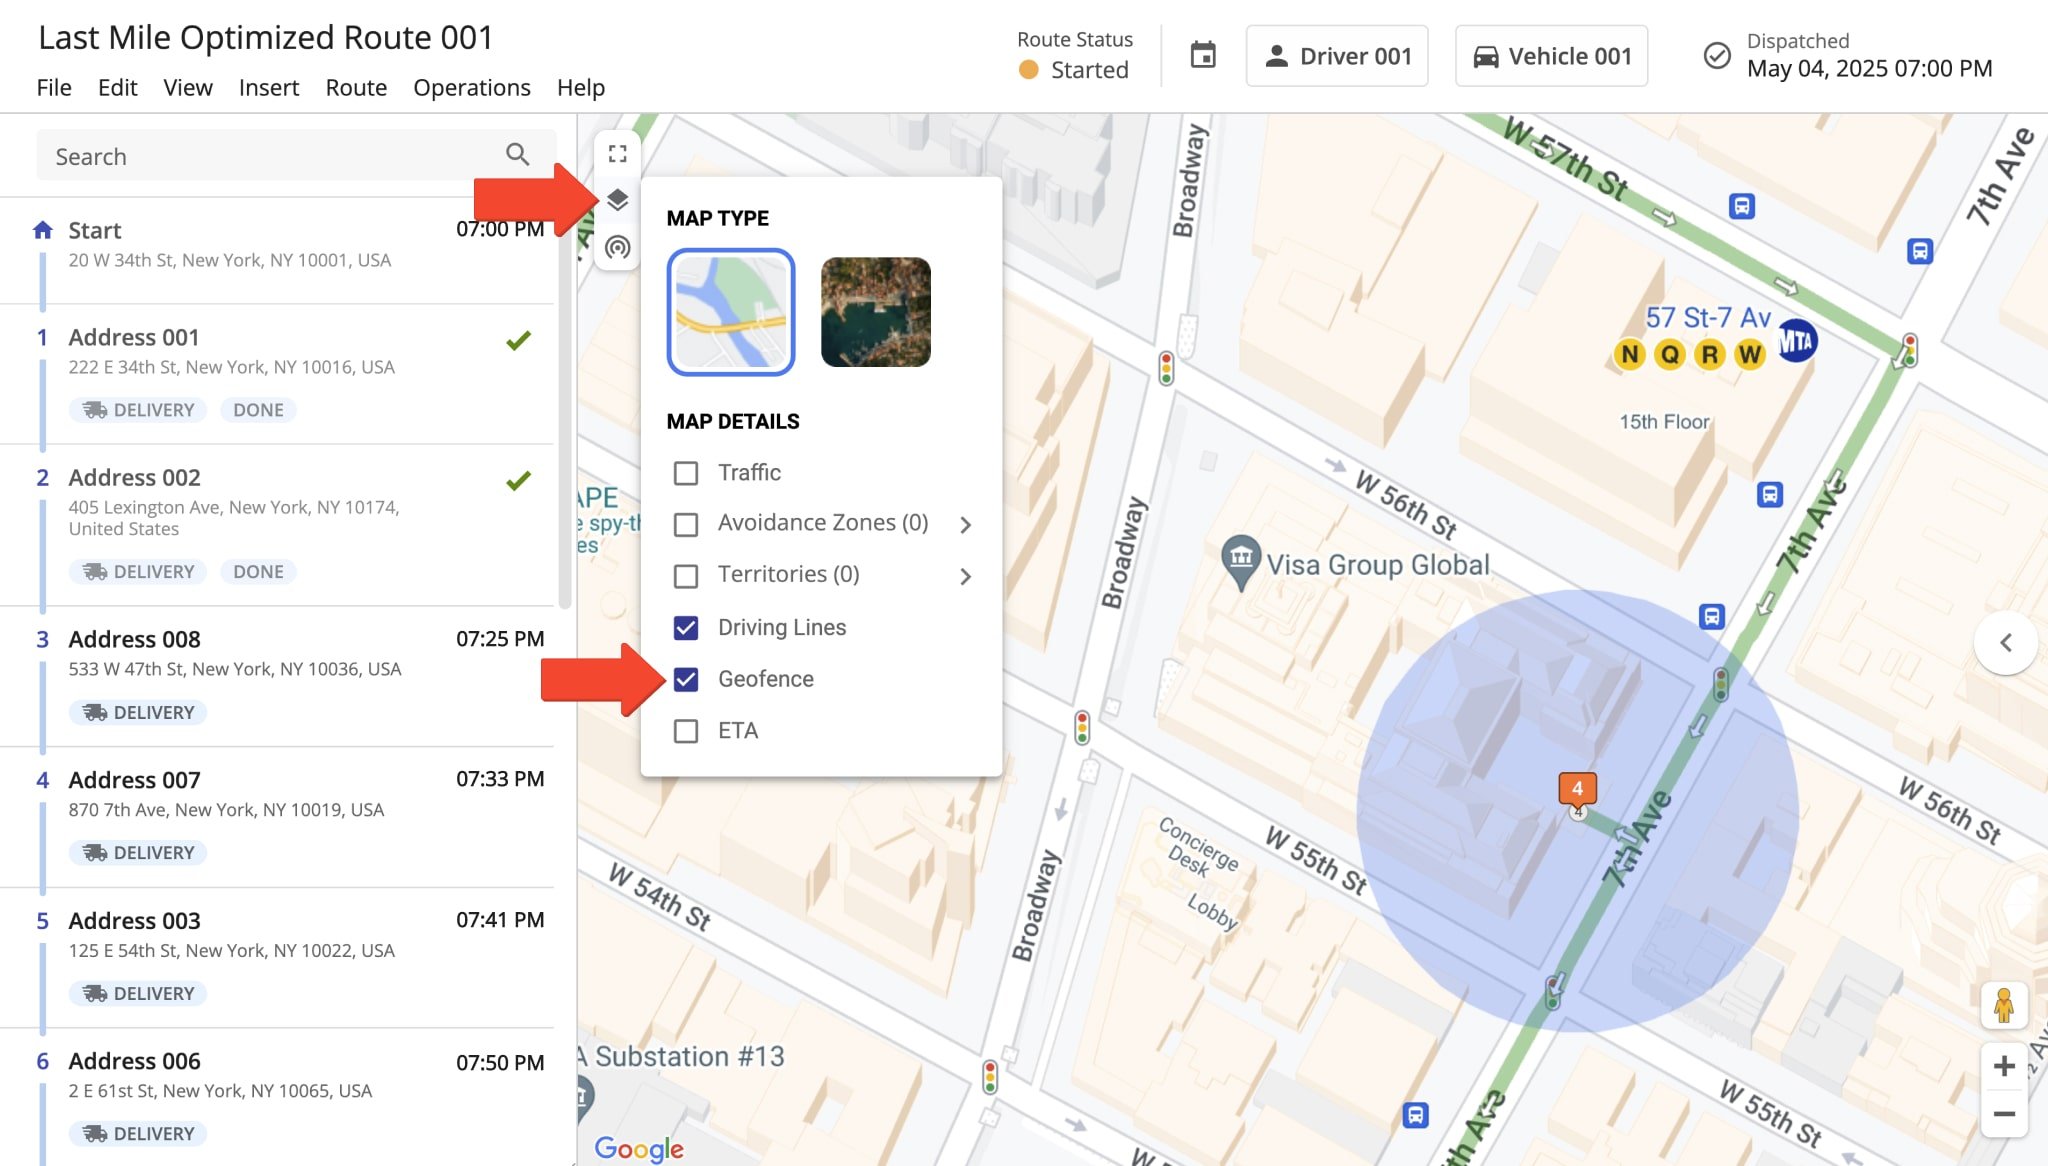 Once enabled, your geofences will appear around destinations on the map. The displayed geofence areas correspond in shape and size to your geofence settings.